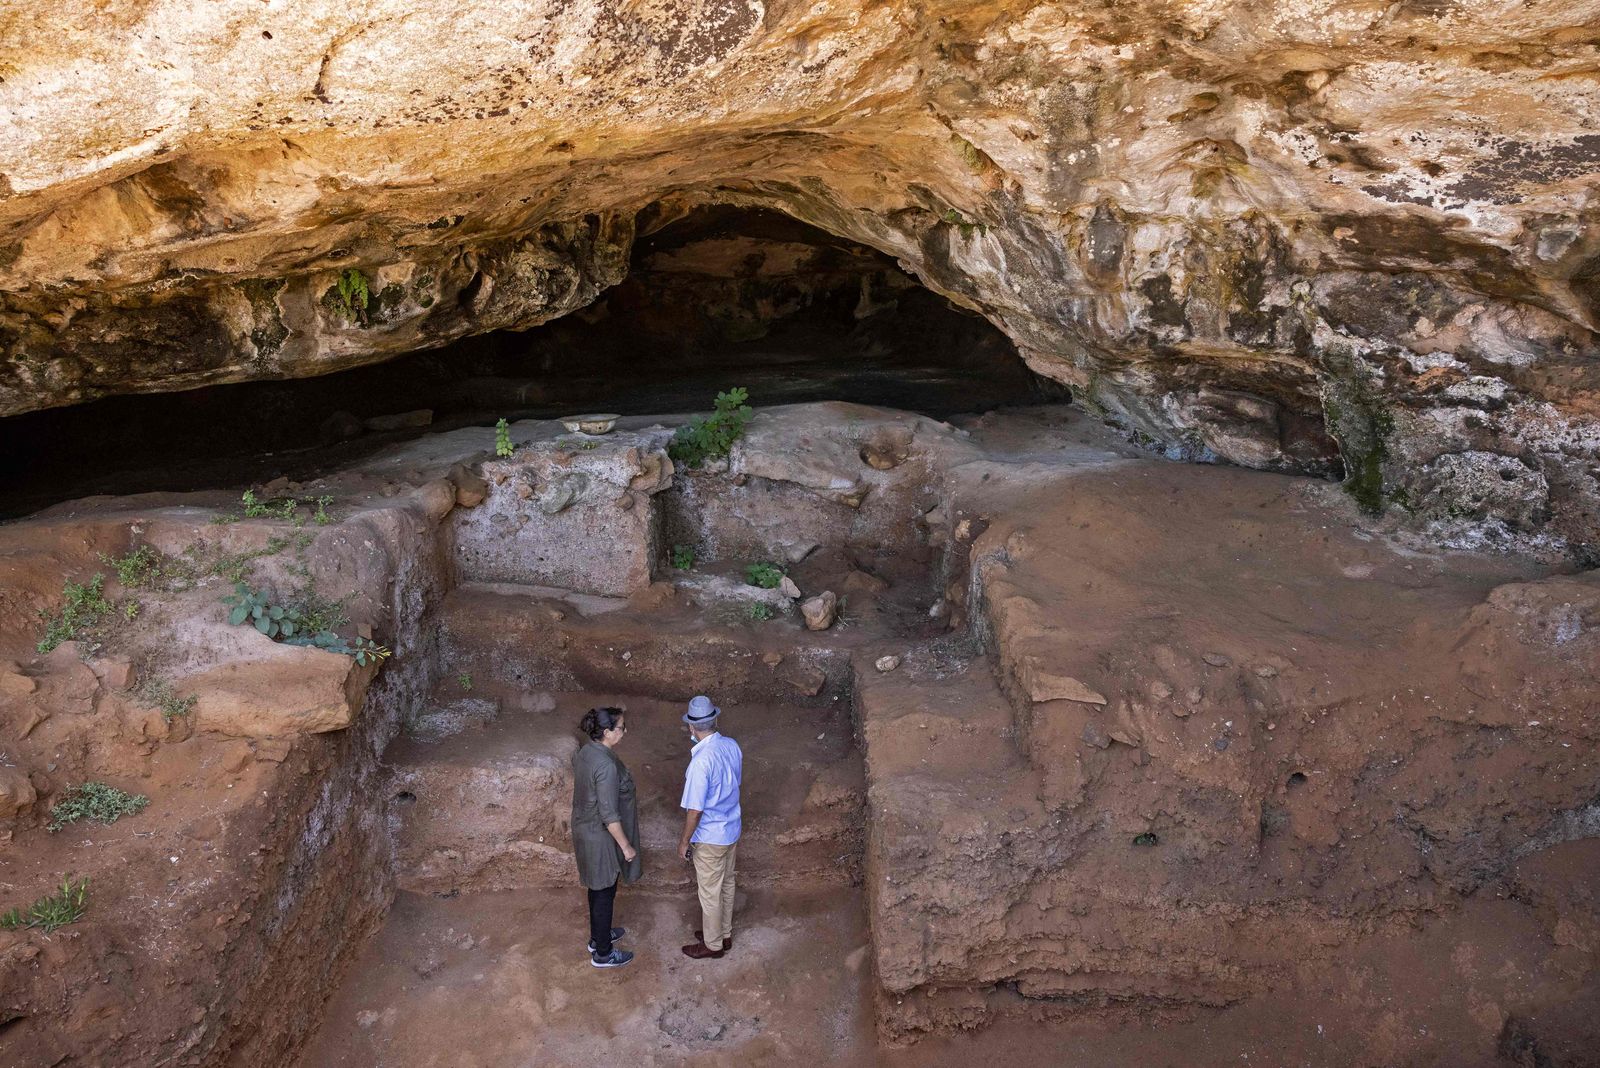 Archeologists walk to enter the Contrebandiers (Smugglers) Cave less than 20 kilometres from the Moroccan capital Rabat, on September 18, 2021. - less than 20 kilometres (12 miles) from the Moroccan capital.Archaeologists in Morocco have identified clothes-making tools fashioned from bone dating back 120,000 years, the oldest ever found, in a cave near Rabat, one of the researchers said. (Photo by FADEL SENNA / AFP) - AFP